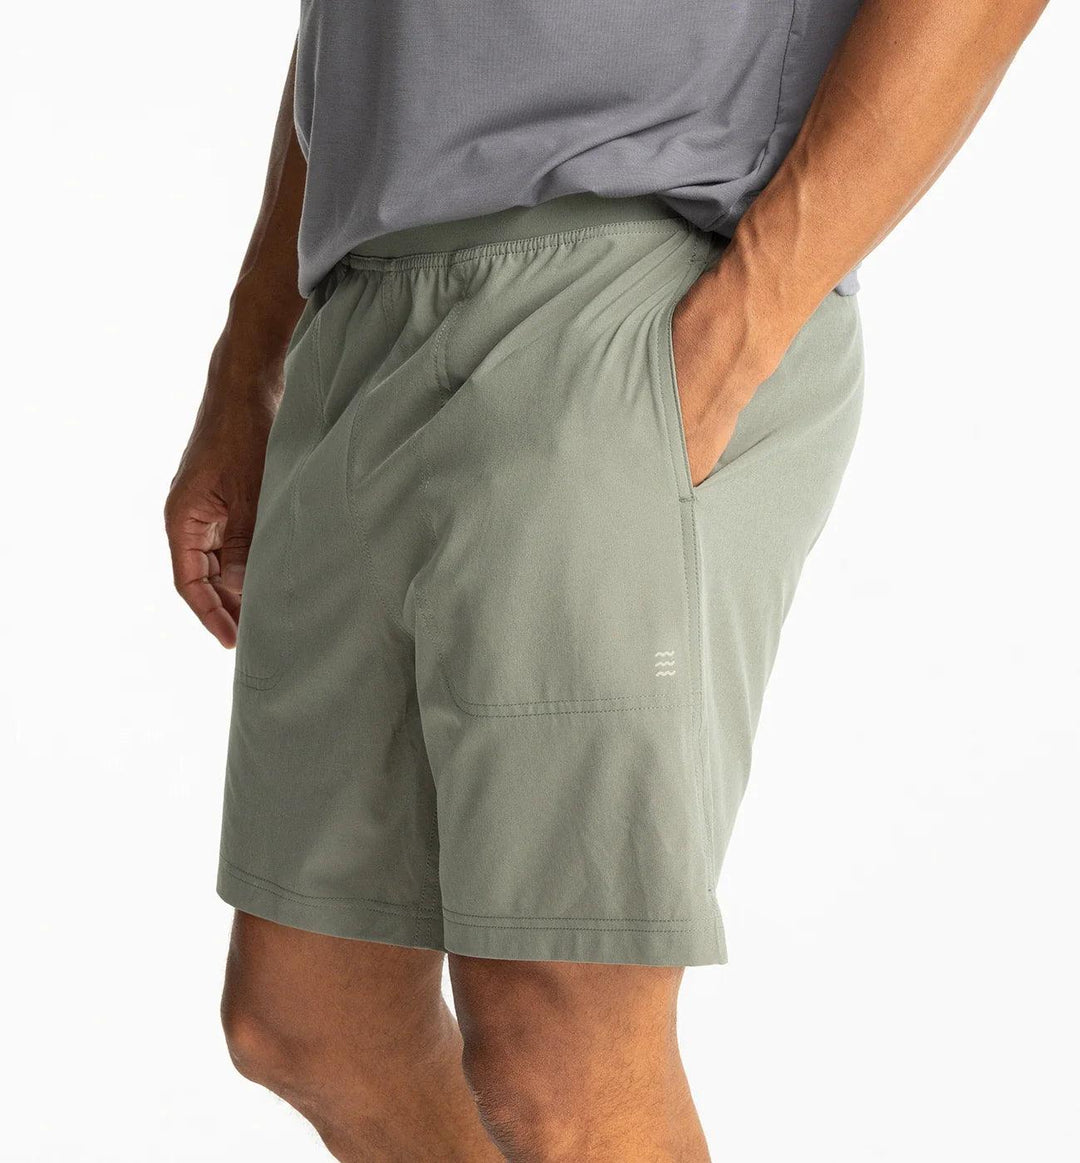 Men's Bamboo-Lined Active Breeze Short 7" - Davidson Provision Co.